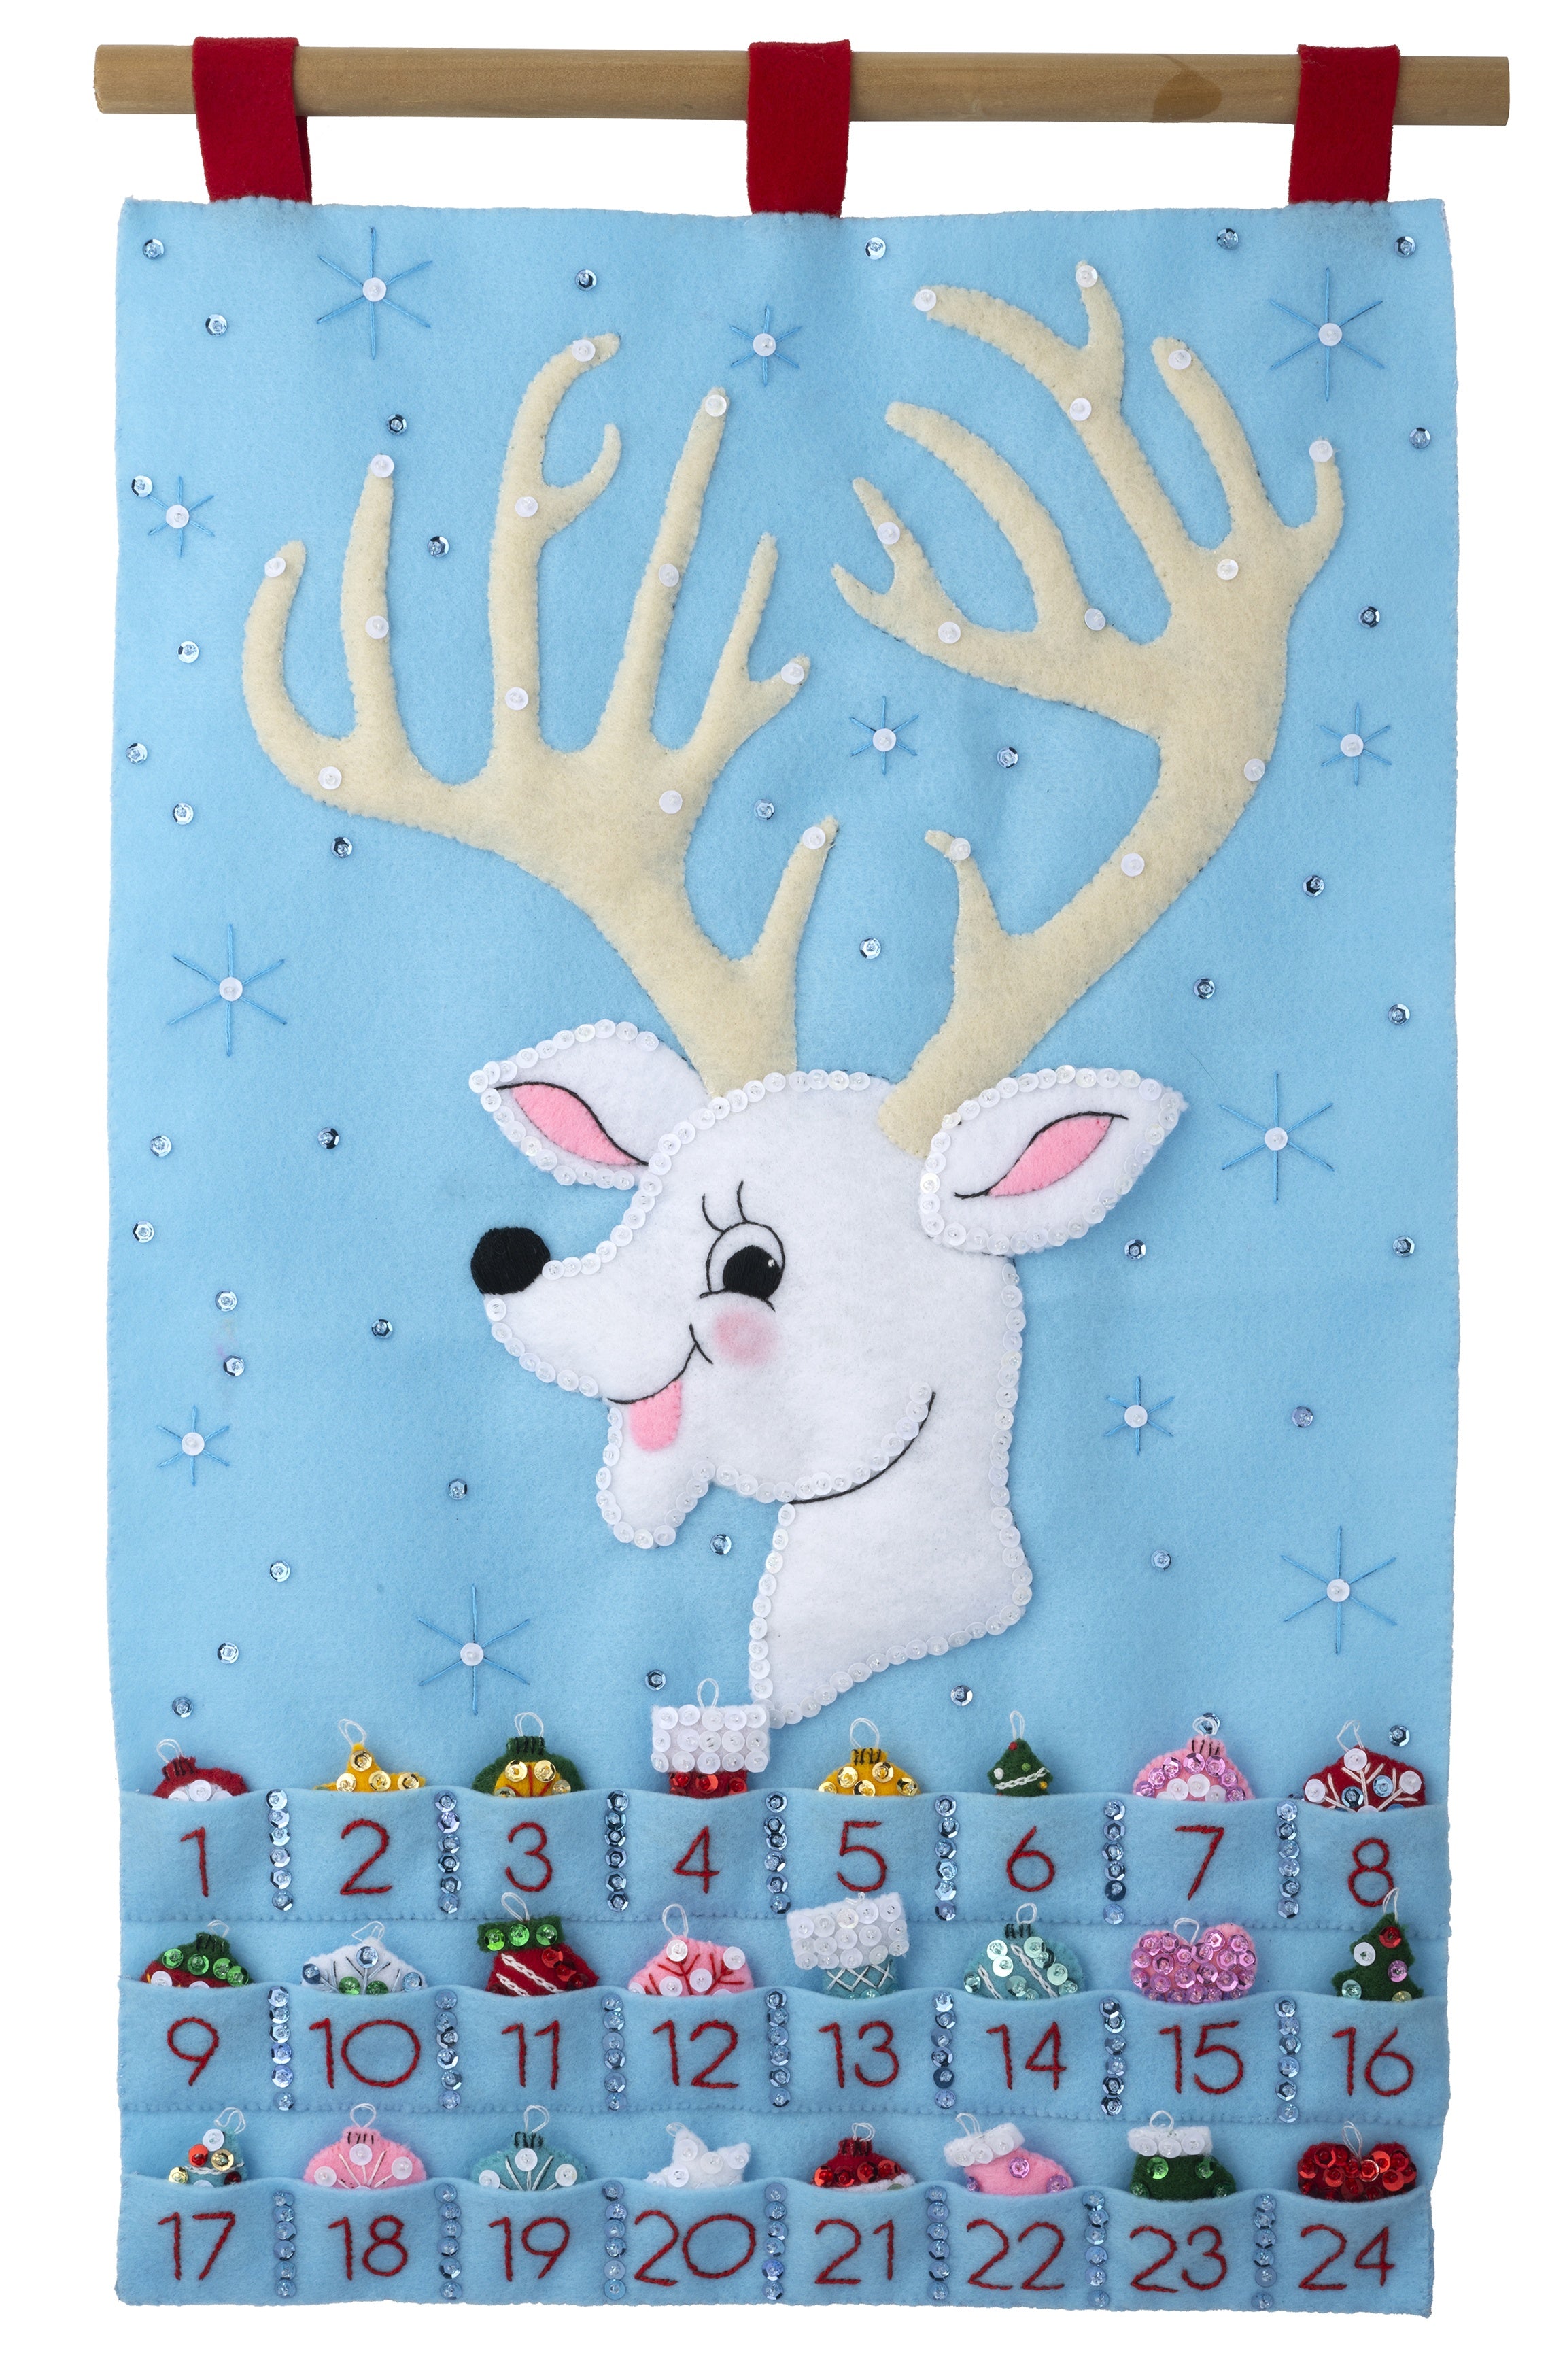 Bucilla felt wall hanging kit. Design features a reindeer with large antlers that hold the twenty-four ornaments. Below the deer, there are twenty-four pockets.